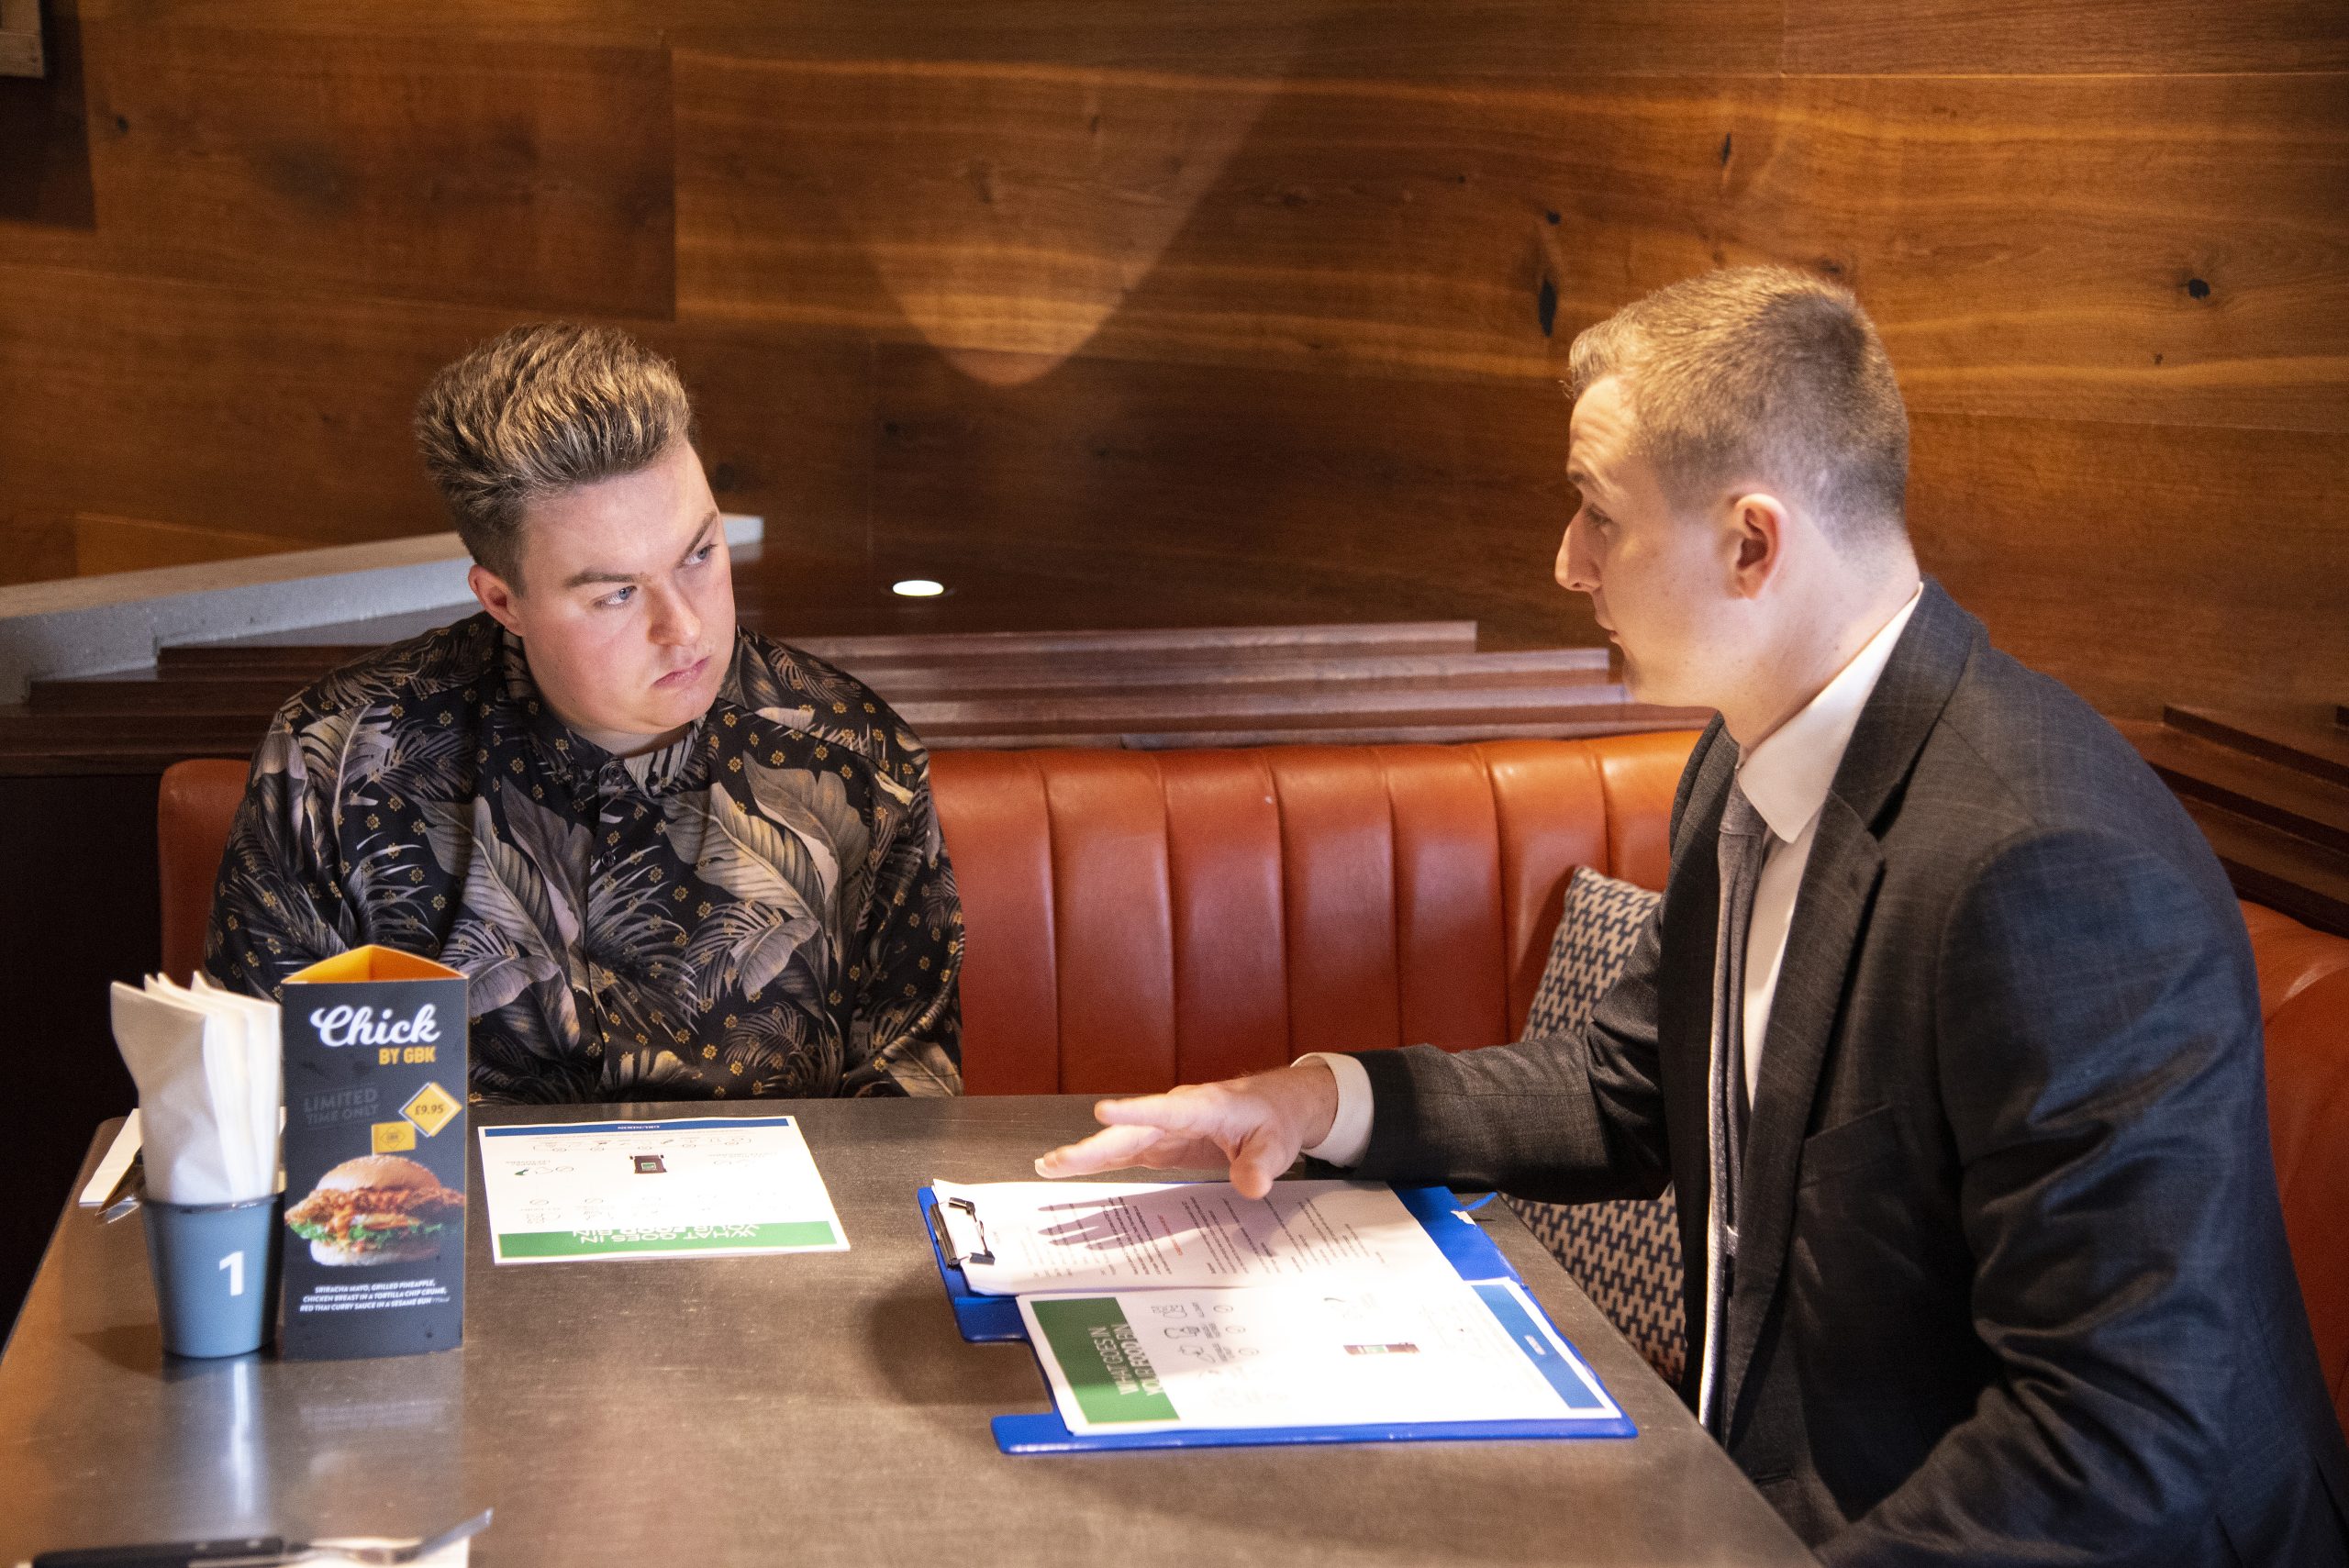 Grundon contract manager James Luckett explains food waste proposals to Edward Walker, Restaurant Manager at Gourmet Burger Kitchen, Lakeside